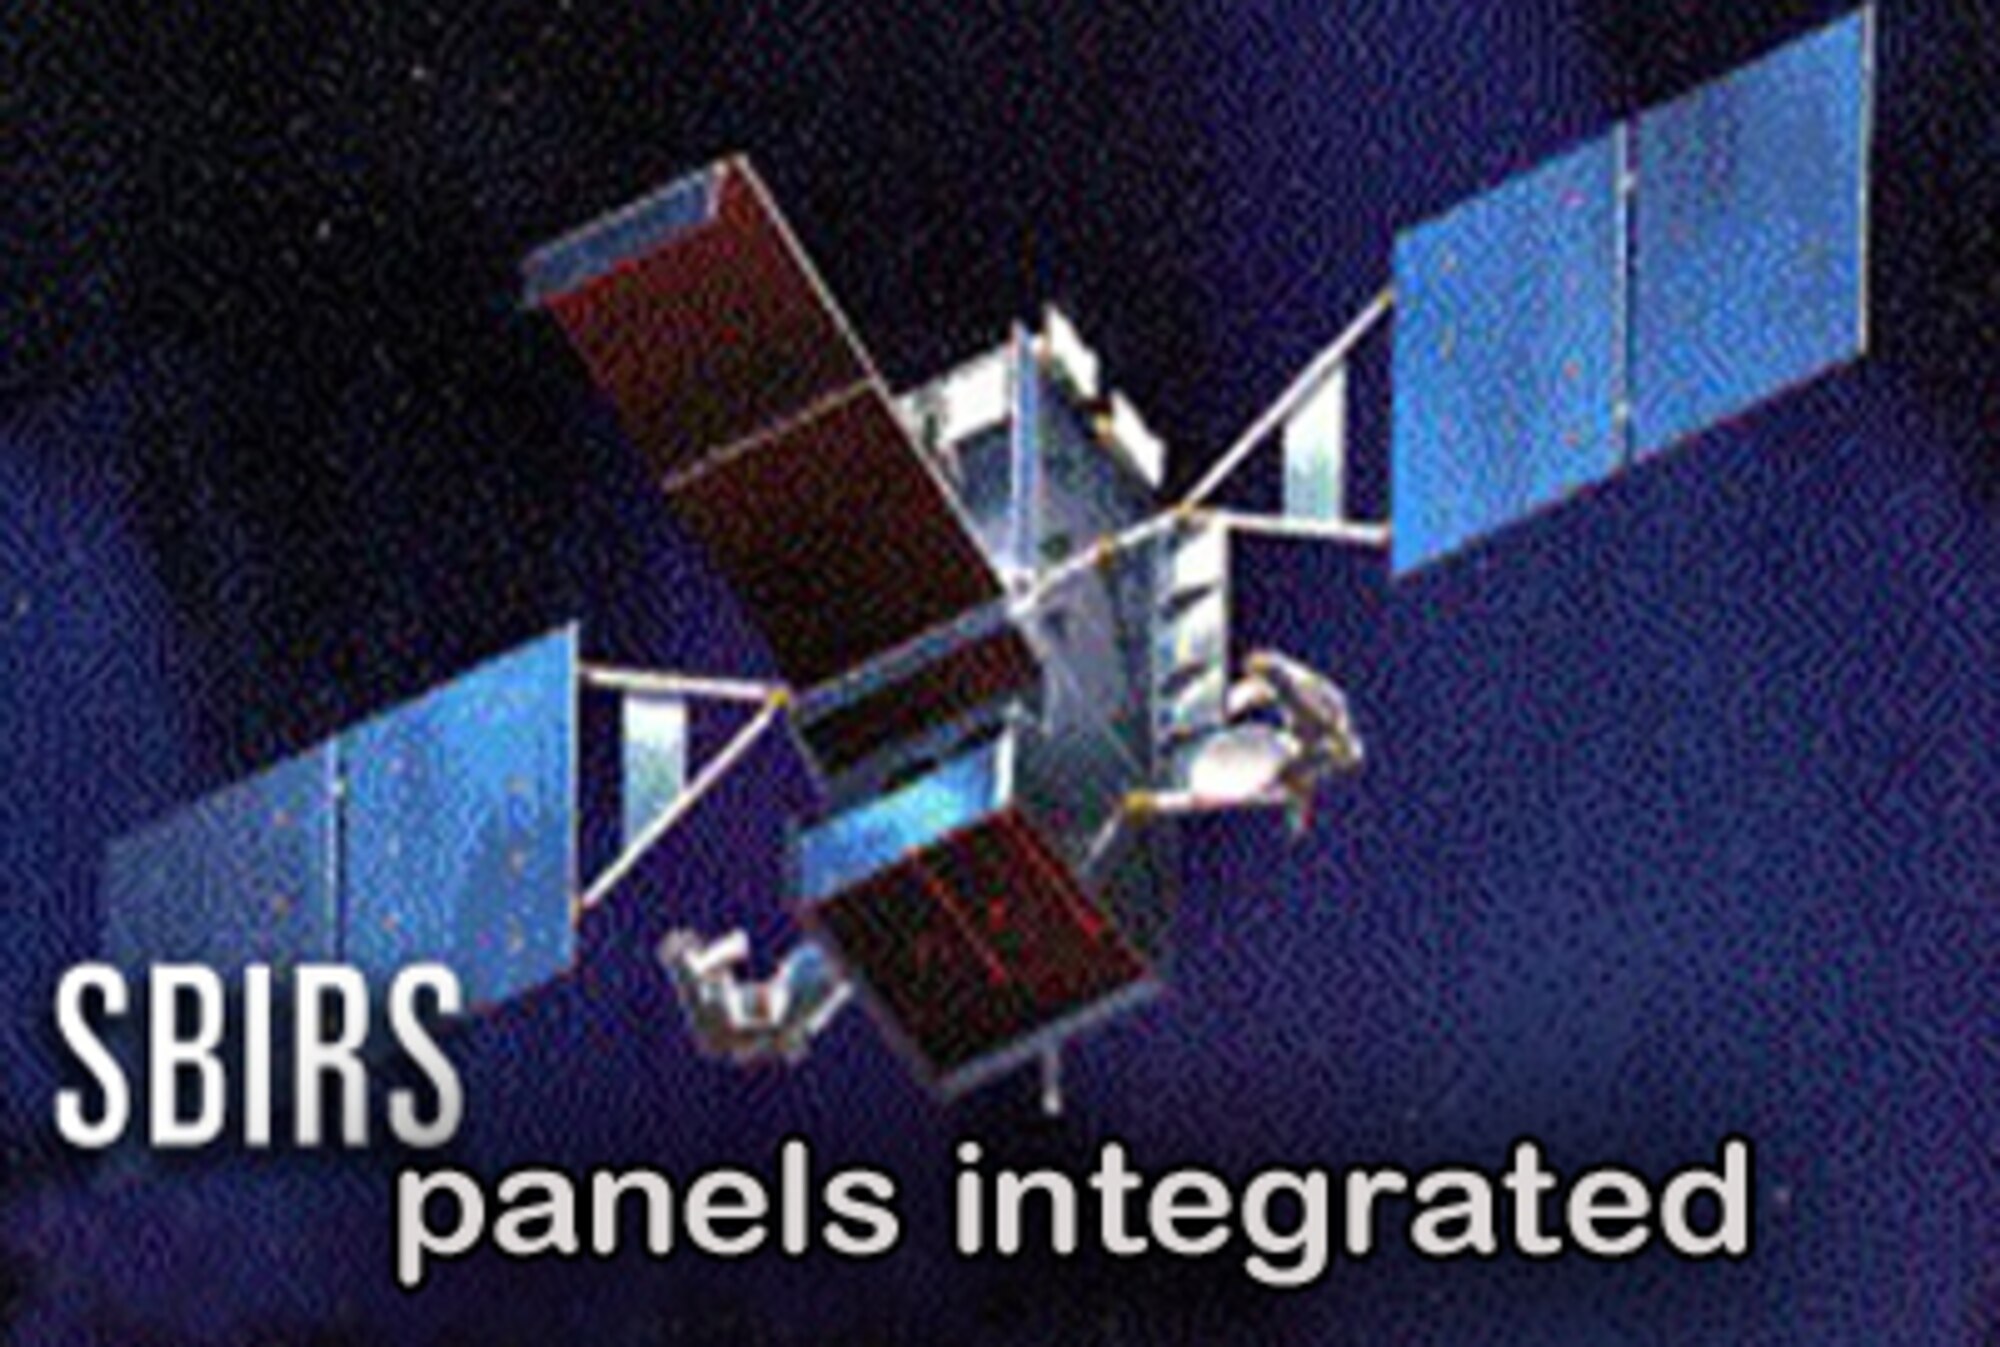 The Space Based Infrared System will deliver a new generation of space-based satellites providing missile warning, missile defense, technical intelligence and battlespace awareness to combatant commanders. (U.S. Air Force graphic)